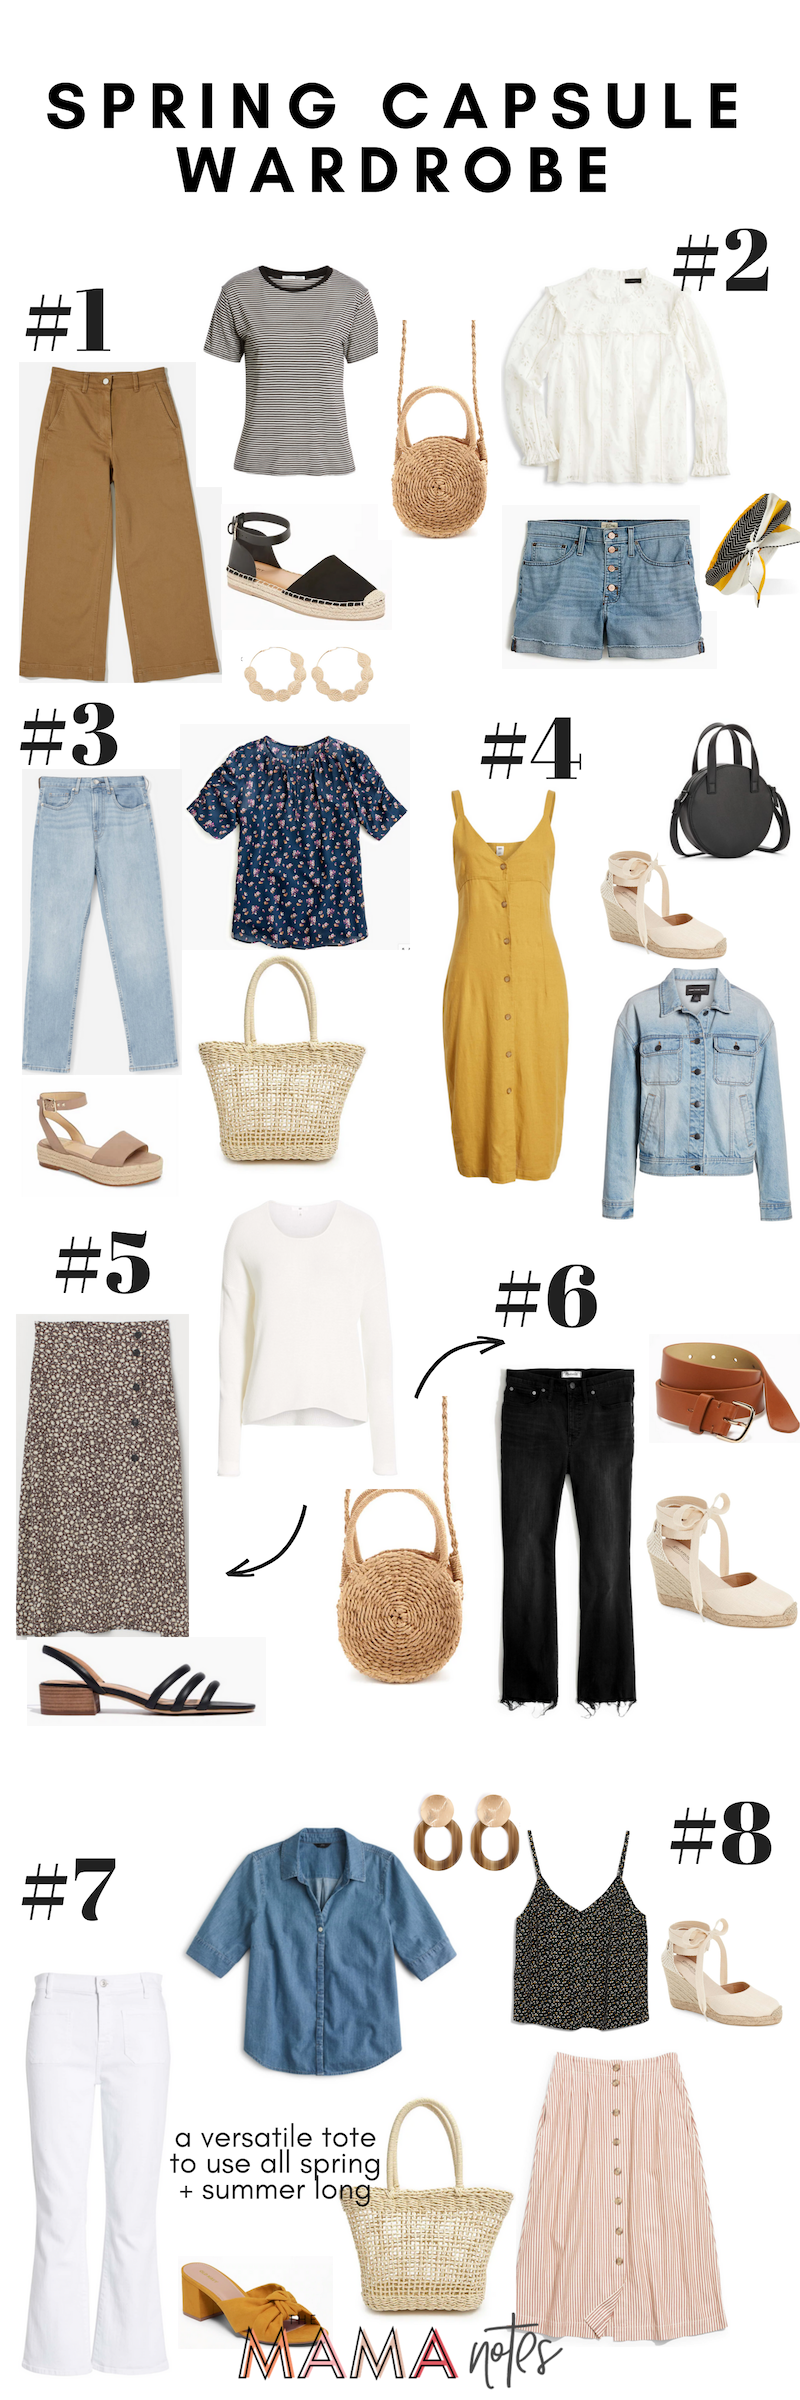 23 Spring Outfit Ideas Mix & Match From Our Capsule Wardrobe - Mama Notes